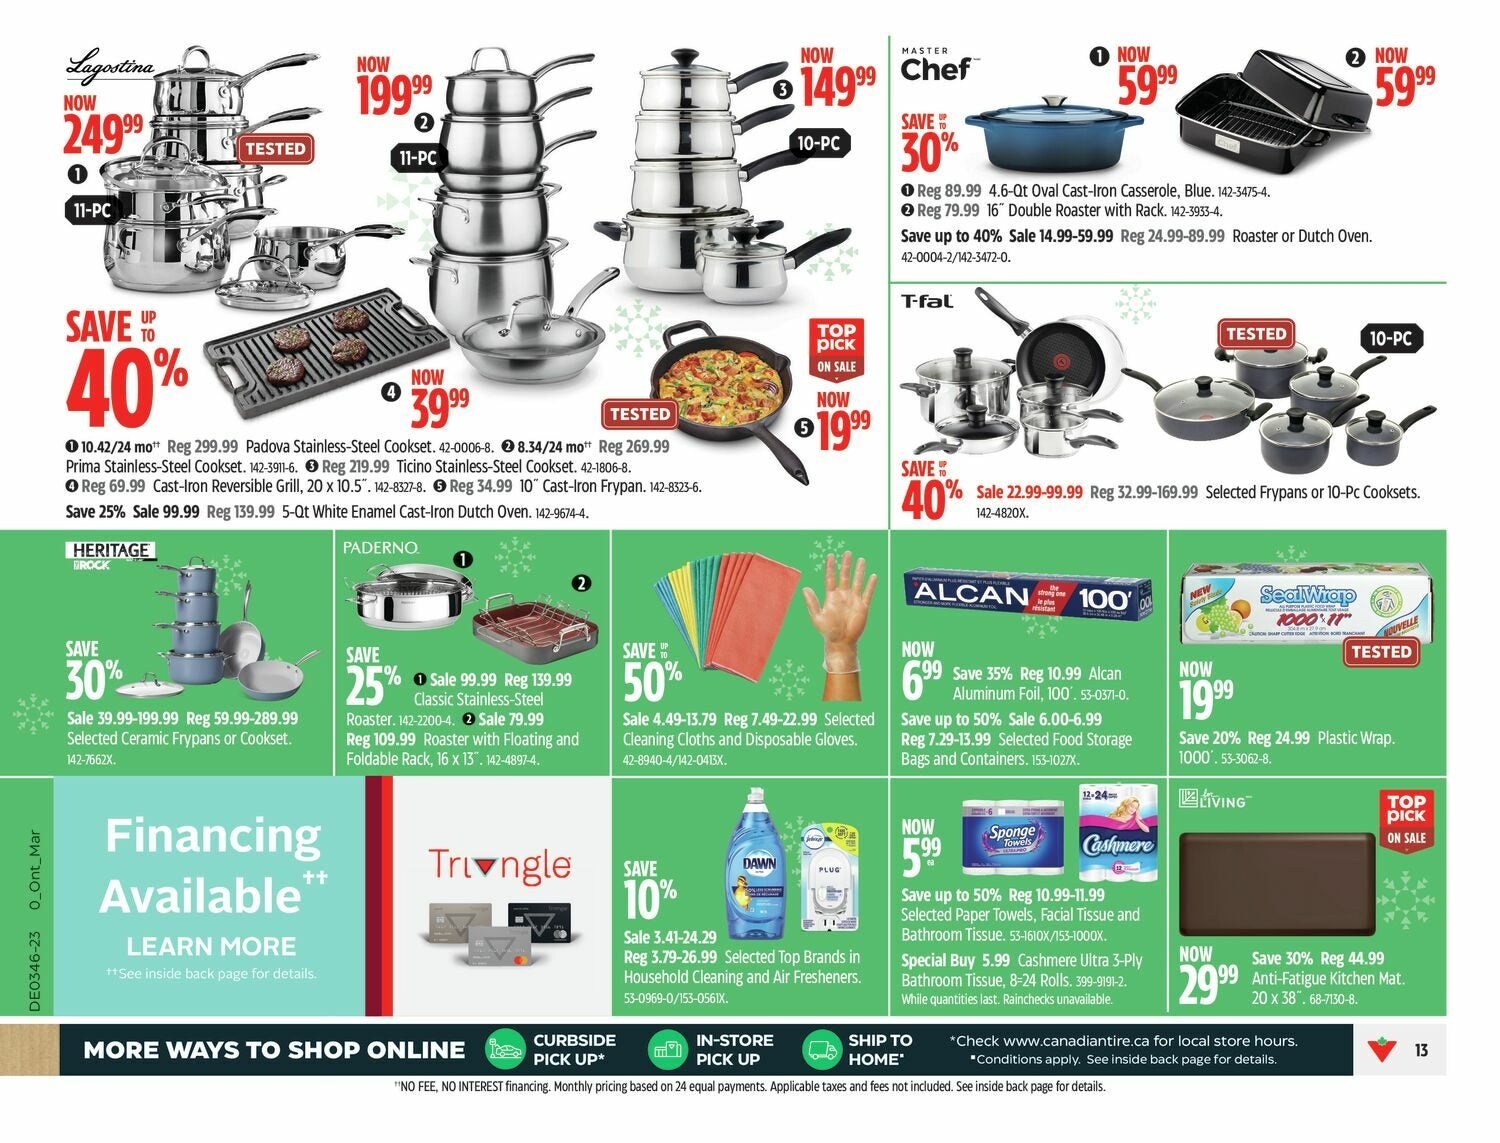 Canadian Tire Weekly Flyer - Weekly Deals - Black Friday Early Deals (ON) -  Nov 9 – 16 